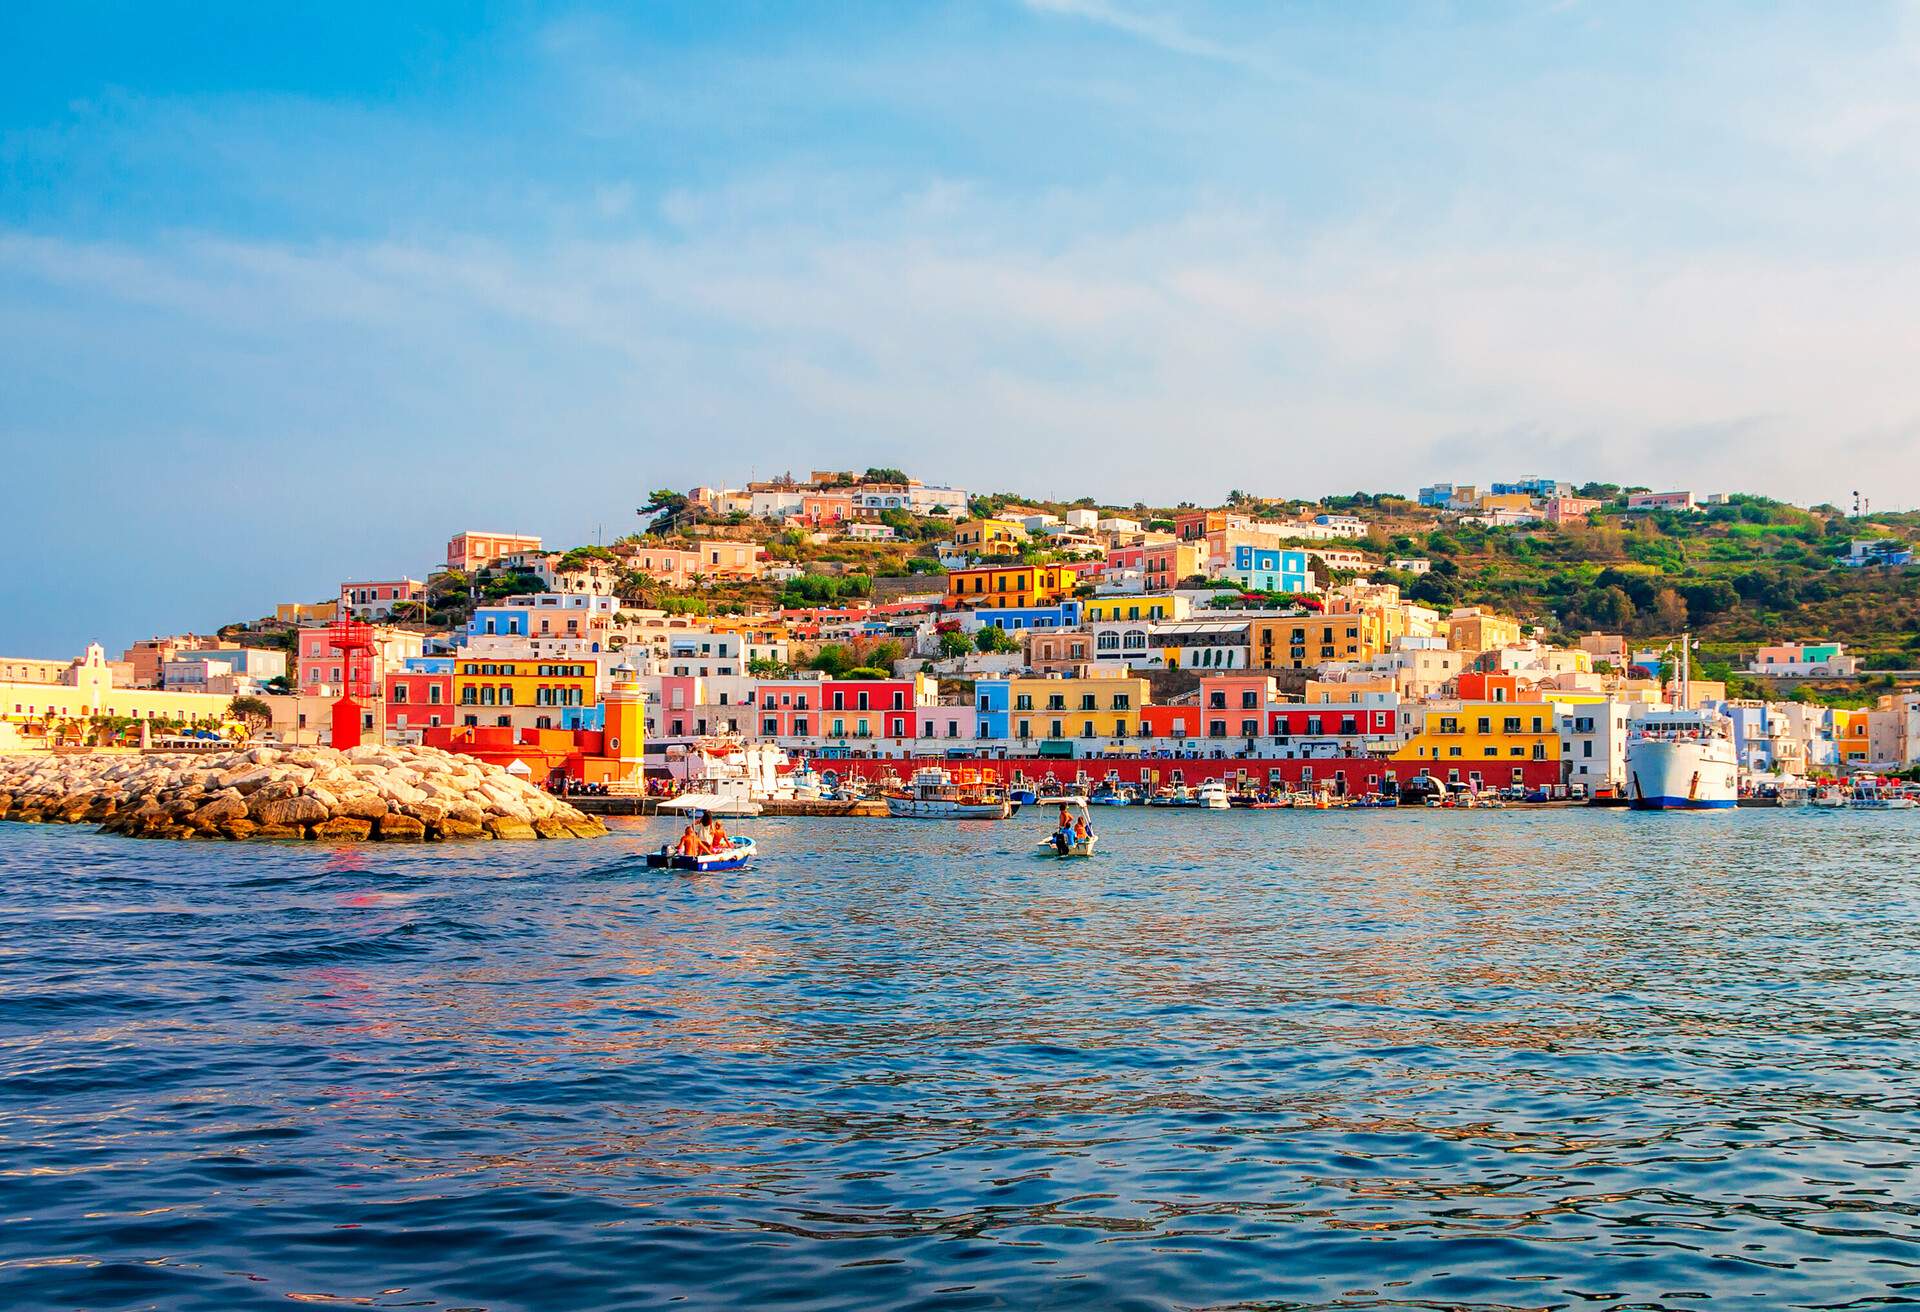 View of the harbor and port at Ponza, Lazio, Italy. Ponza is the largest island of the Italian Pontine Islands archipelago.; Shutterstock ID 1497974981